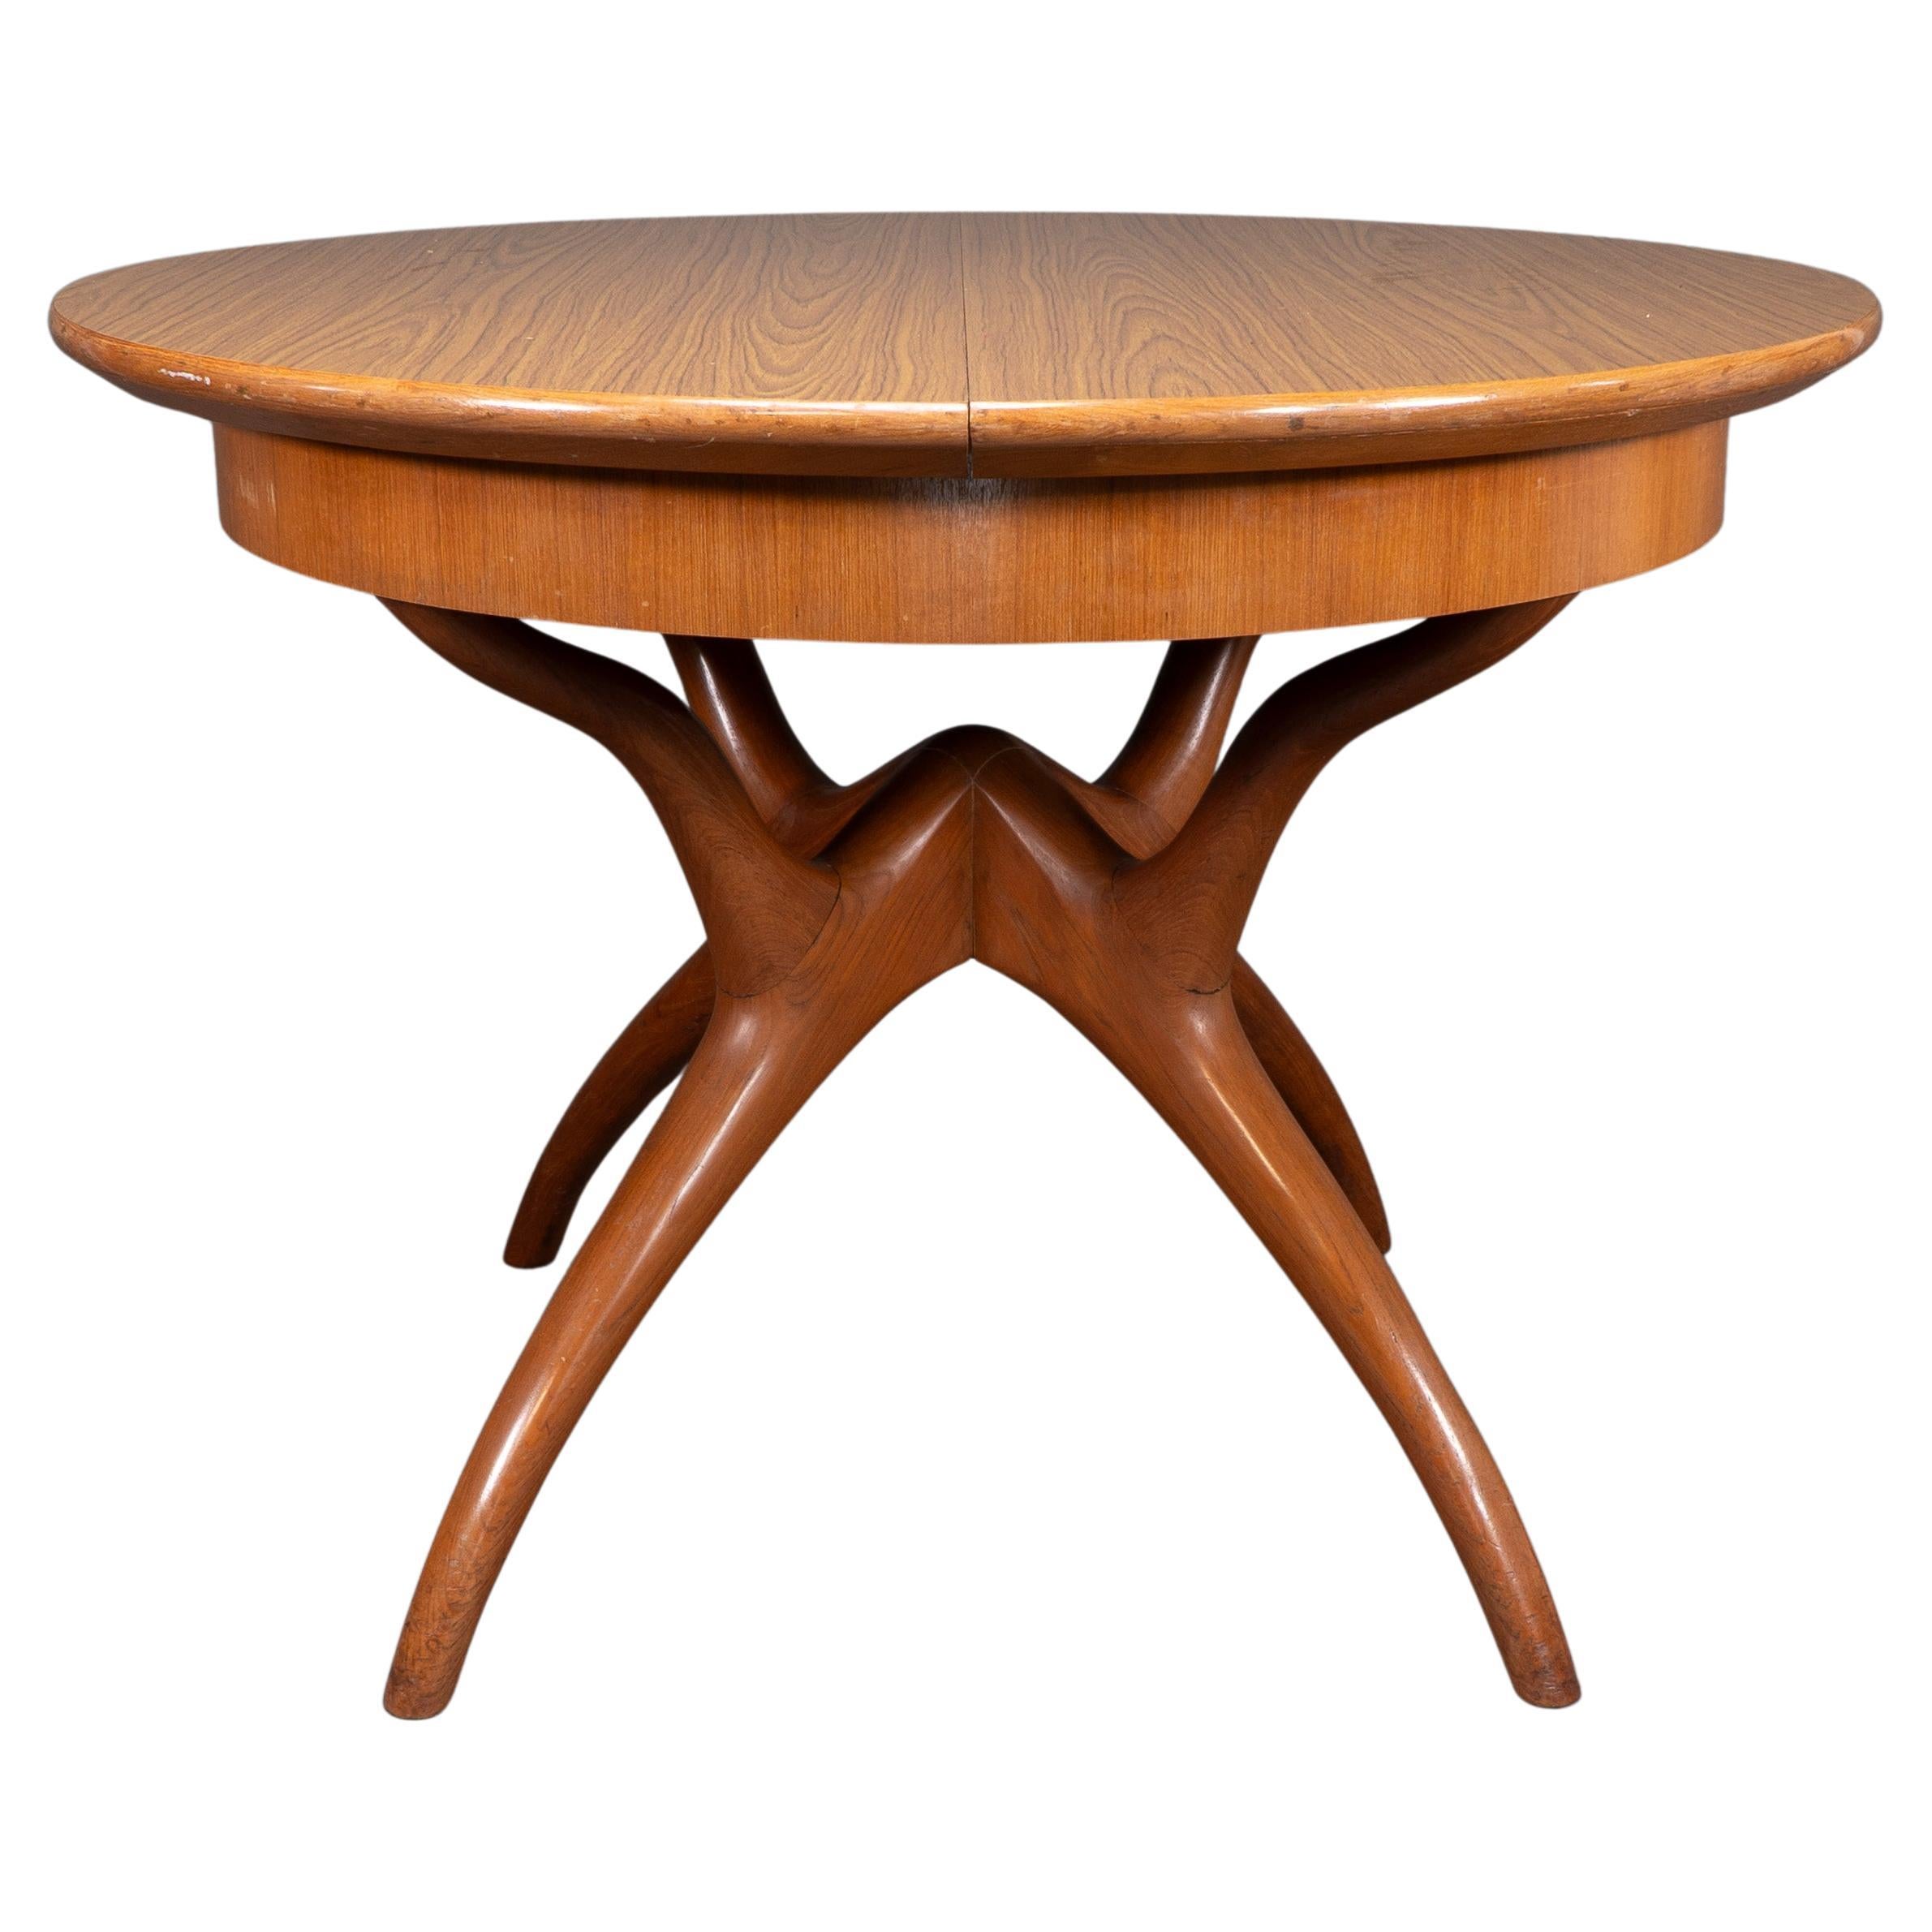 Midcentury Teak Extending Dining Table with Organic Style Cross Frame Legs For Sale